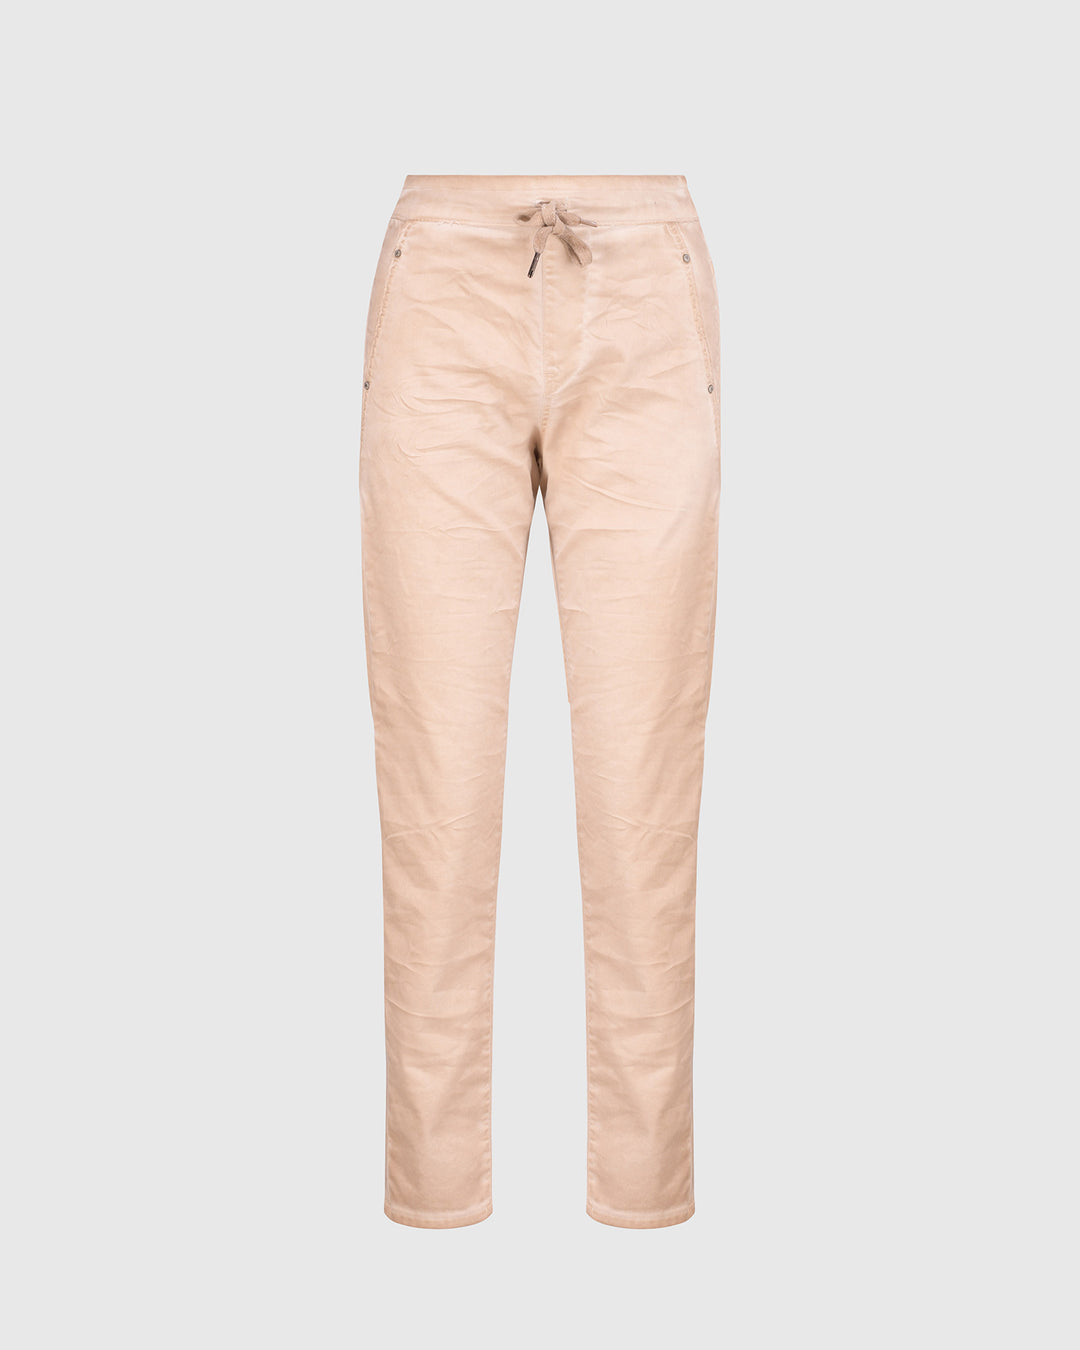 Distressed Iconic Stretch Jeans, Sand Wash